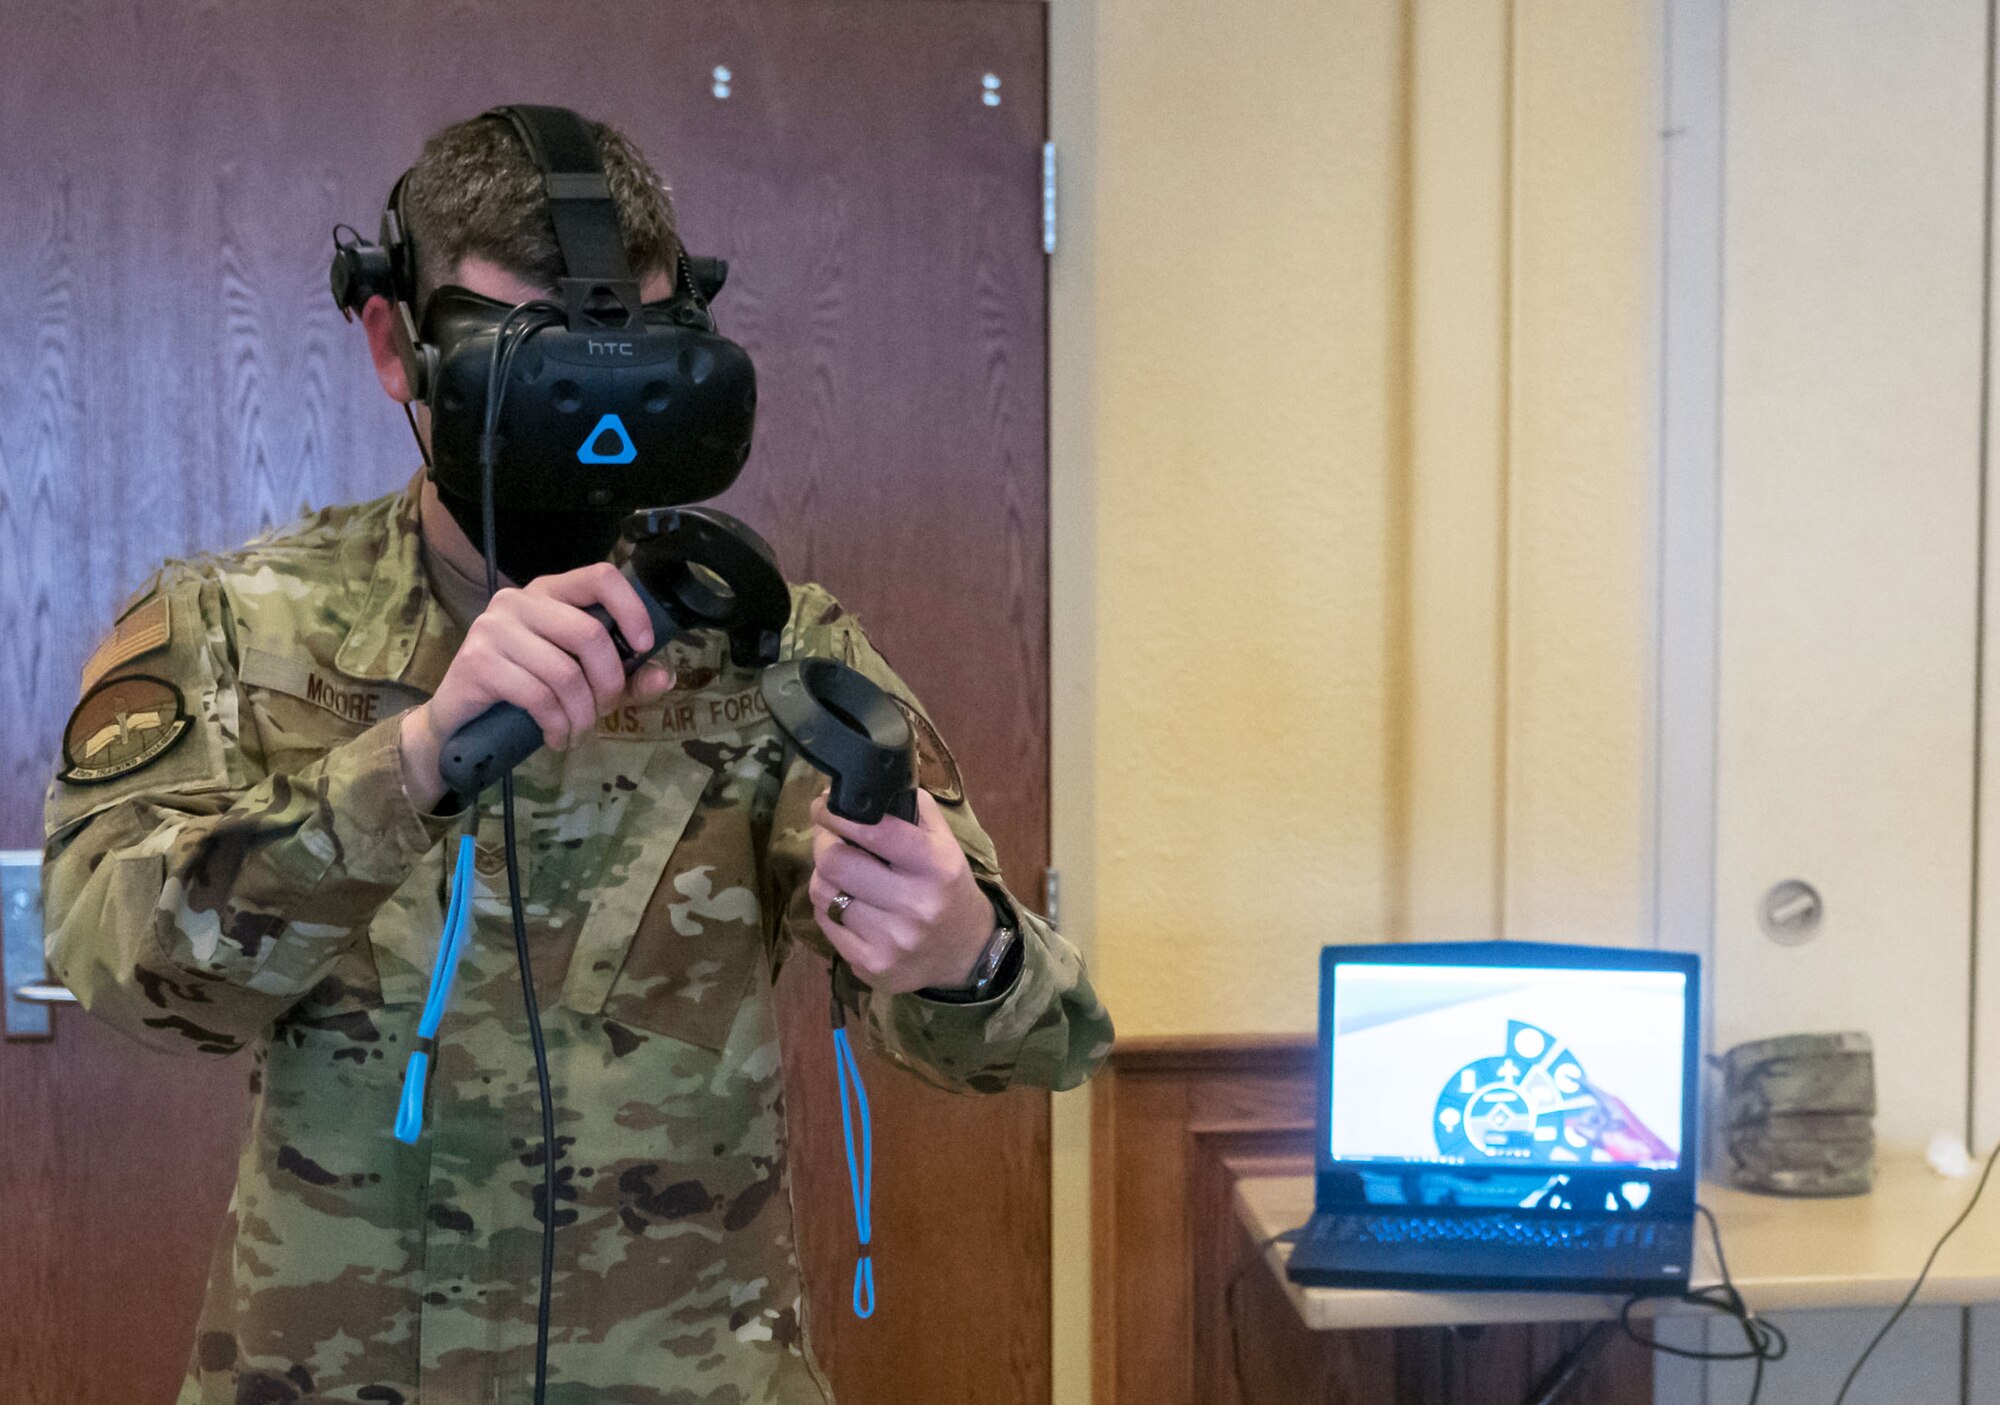 U.S. Air Force Staff Sgt. Braden Moore, 334th Training Squadron instructor, tests the airfield management virtual reality trainer during the 81st Training Group Next Level Showcase inside the Bay Breeze Event Center at Keesler Air Force Base, Mississippi, March 17, 2021. The showcase was the crowning point of the 81st TRG's past year technological and innovative think tank. (U.S. Air Force photo by Andre' Askew)